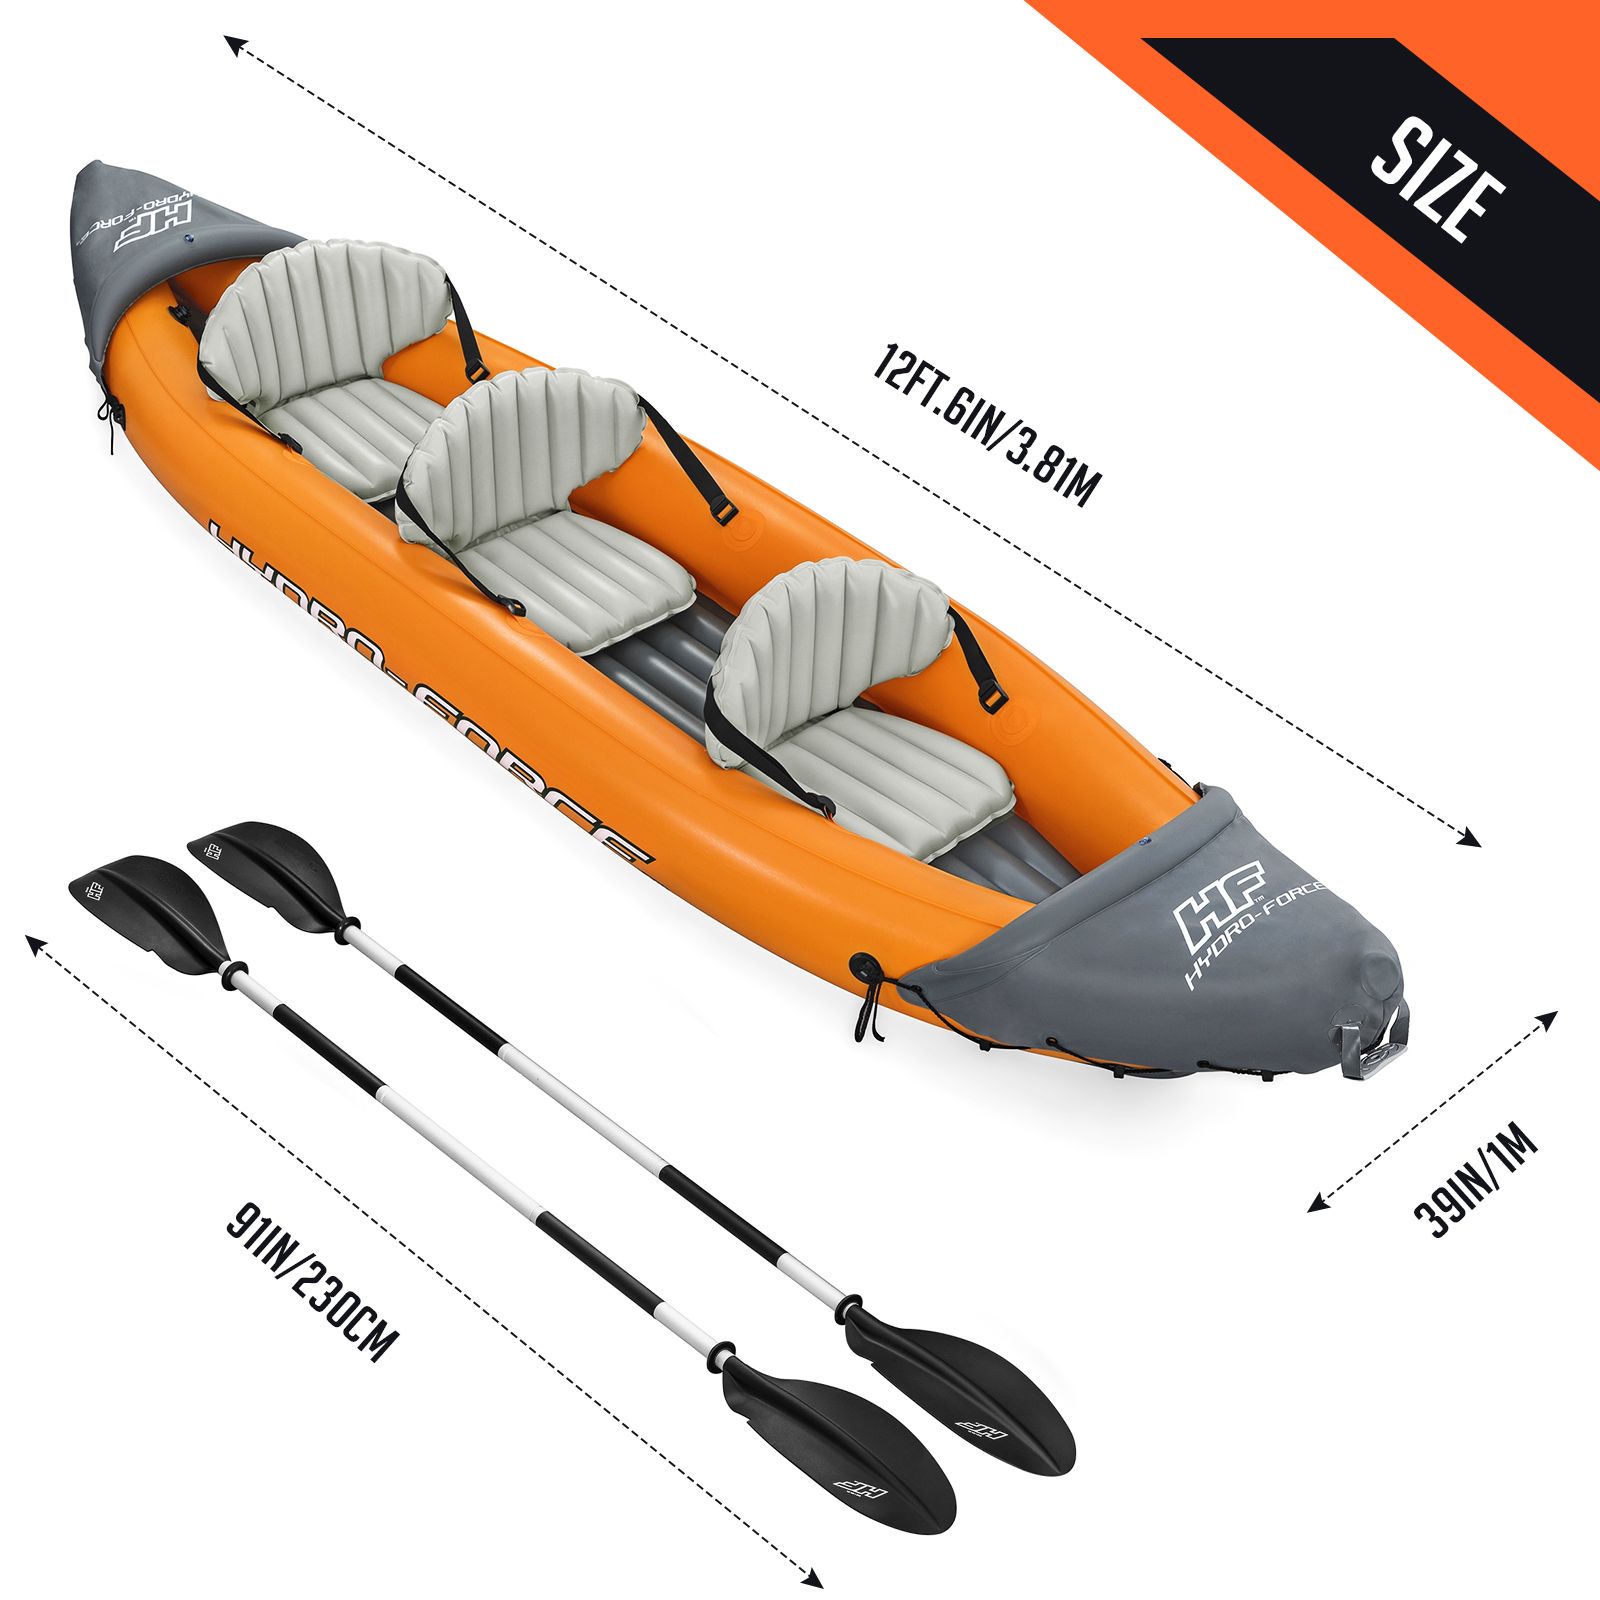 Bestway 3 Man Inflatable Kayak Blow Up Boat Kayaking Water Sport Paddling  Raft Canoe Fishing Three Person Seater with Paddles Hand Pump Carry Bag